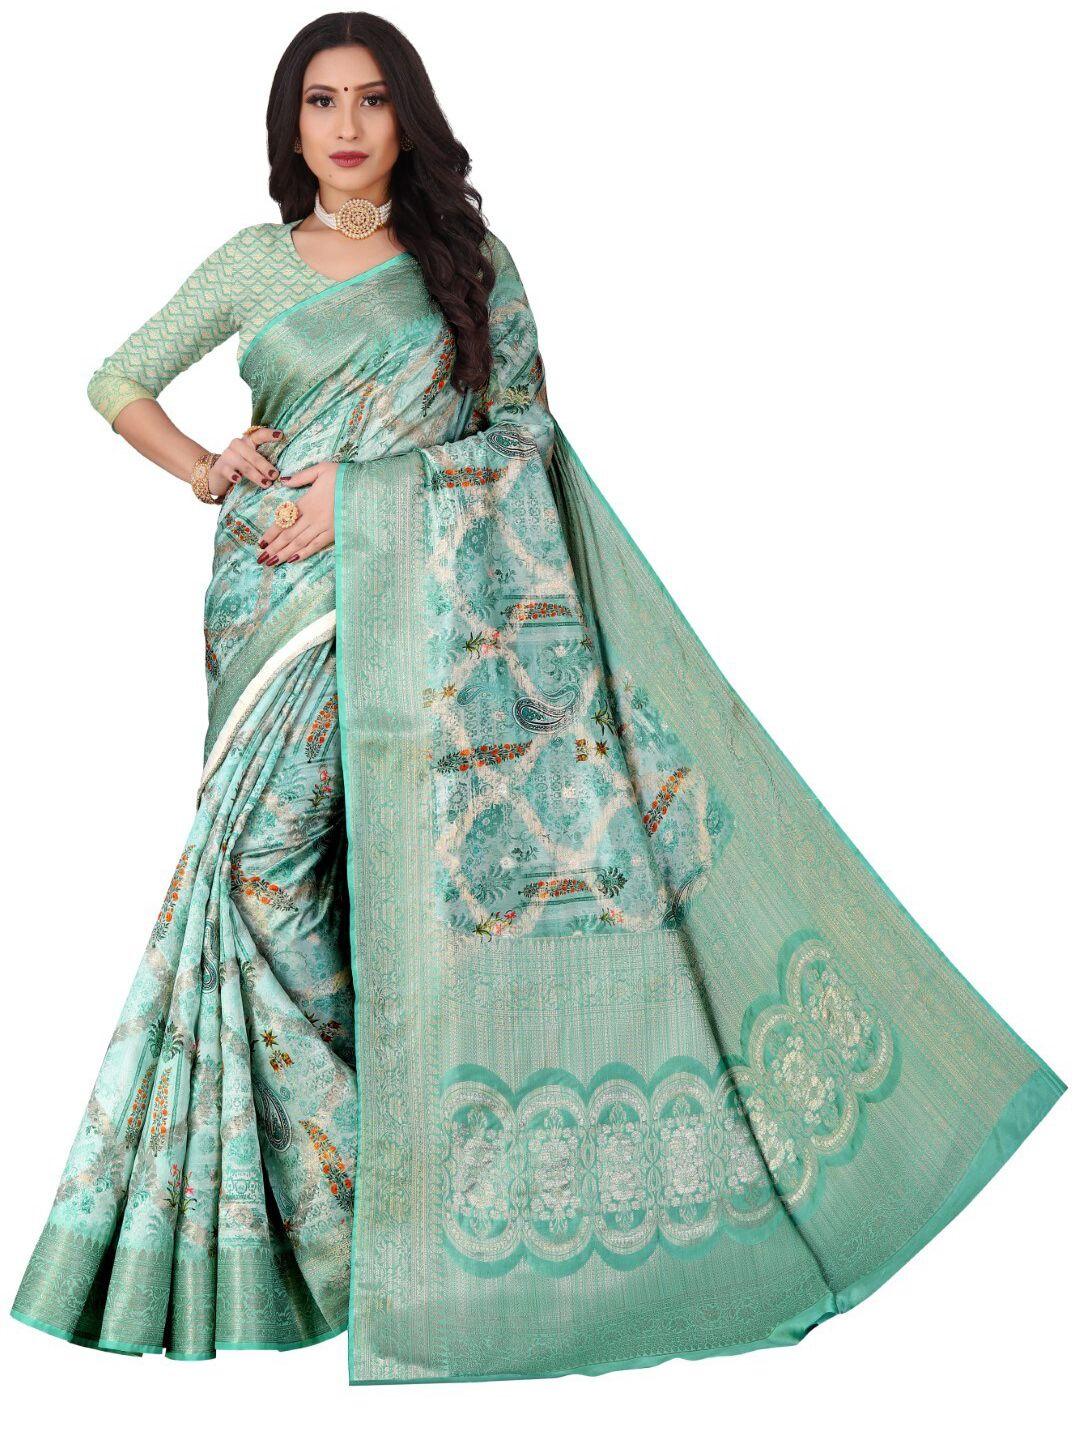 roots4 creation turquoise blue & gold-toned woven design zari organza saree